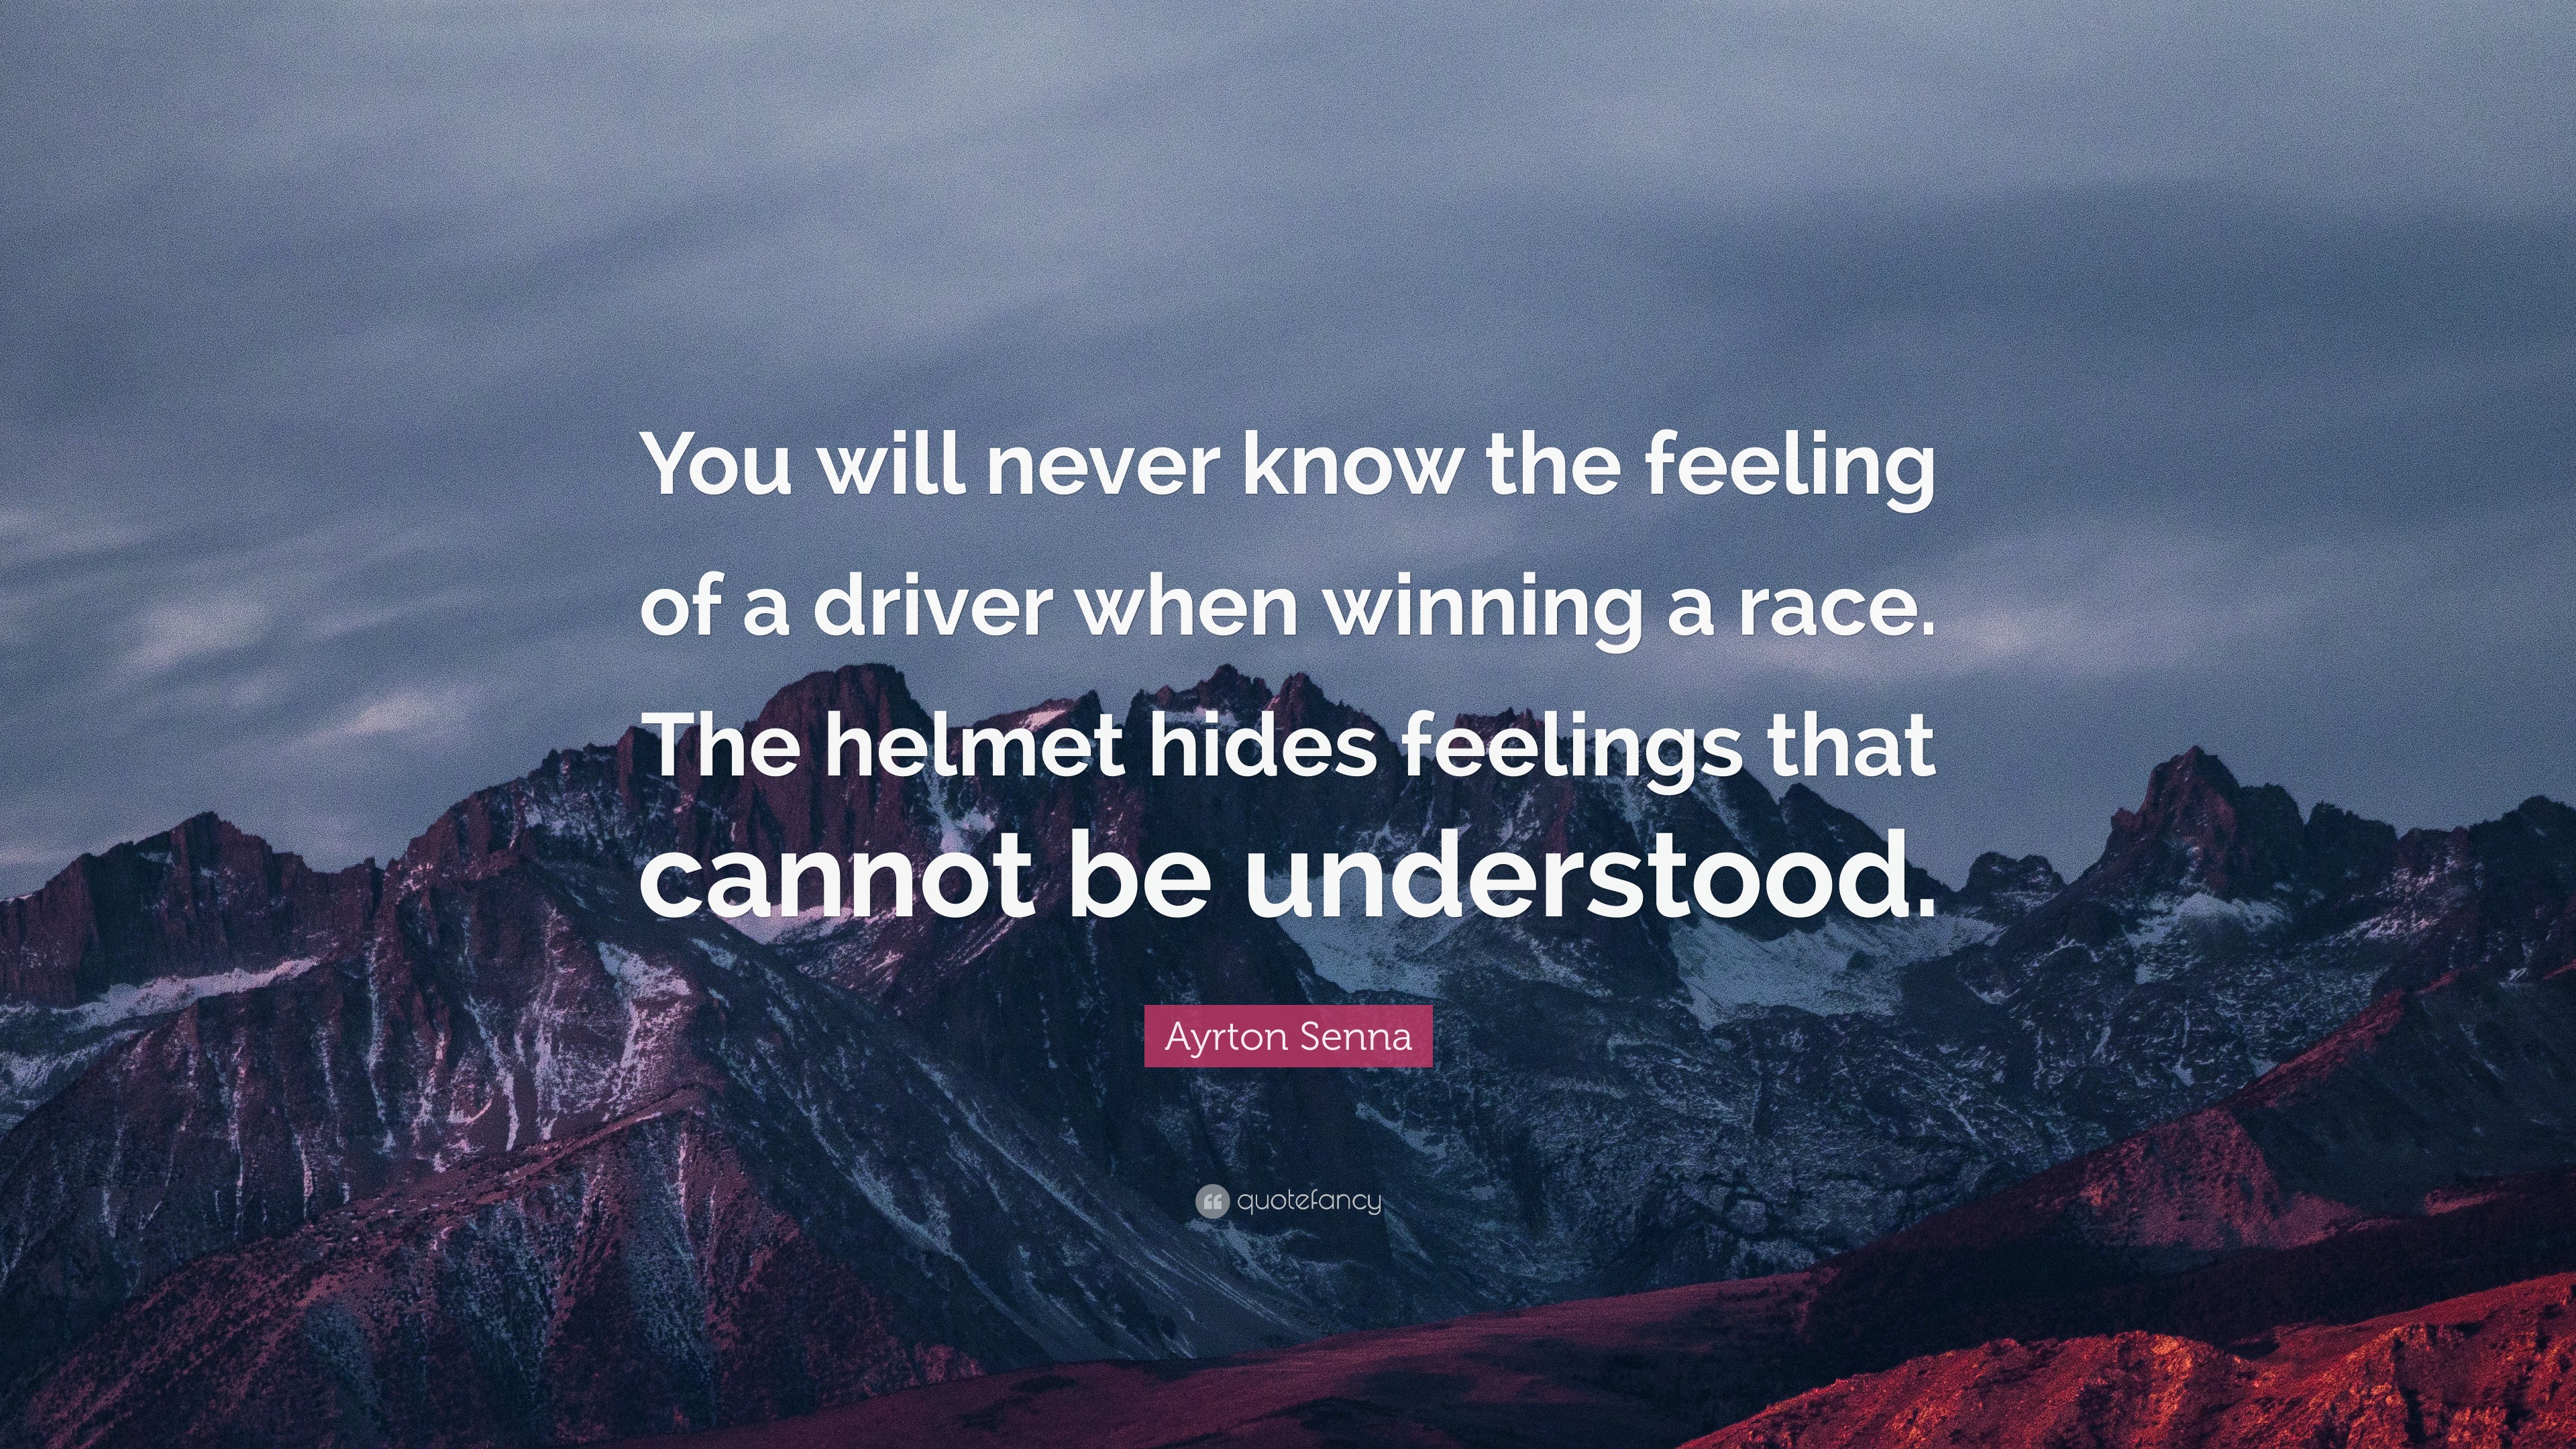 Ayrton Senna Quote: "You will never know the feeling of a ...